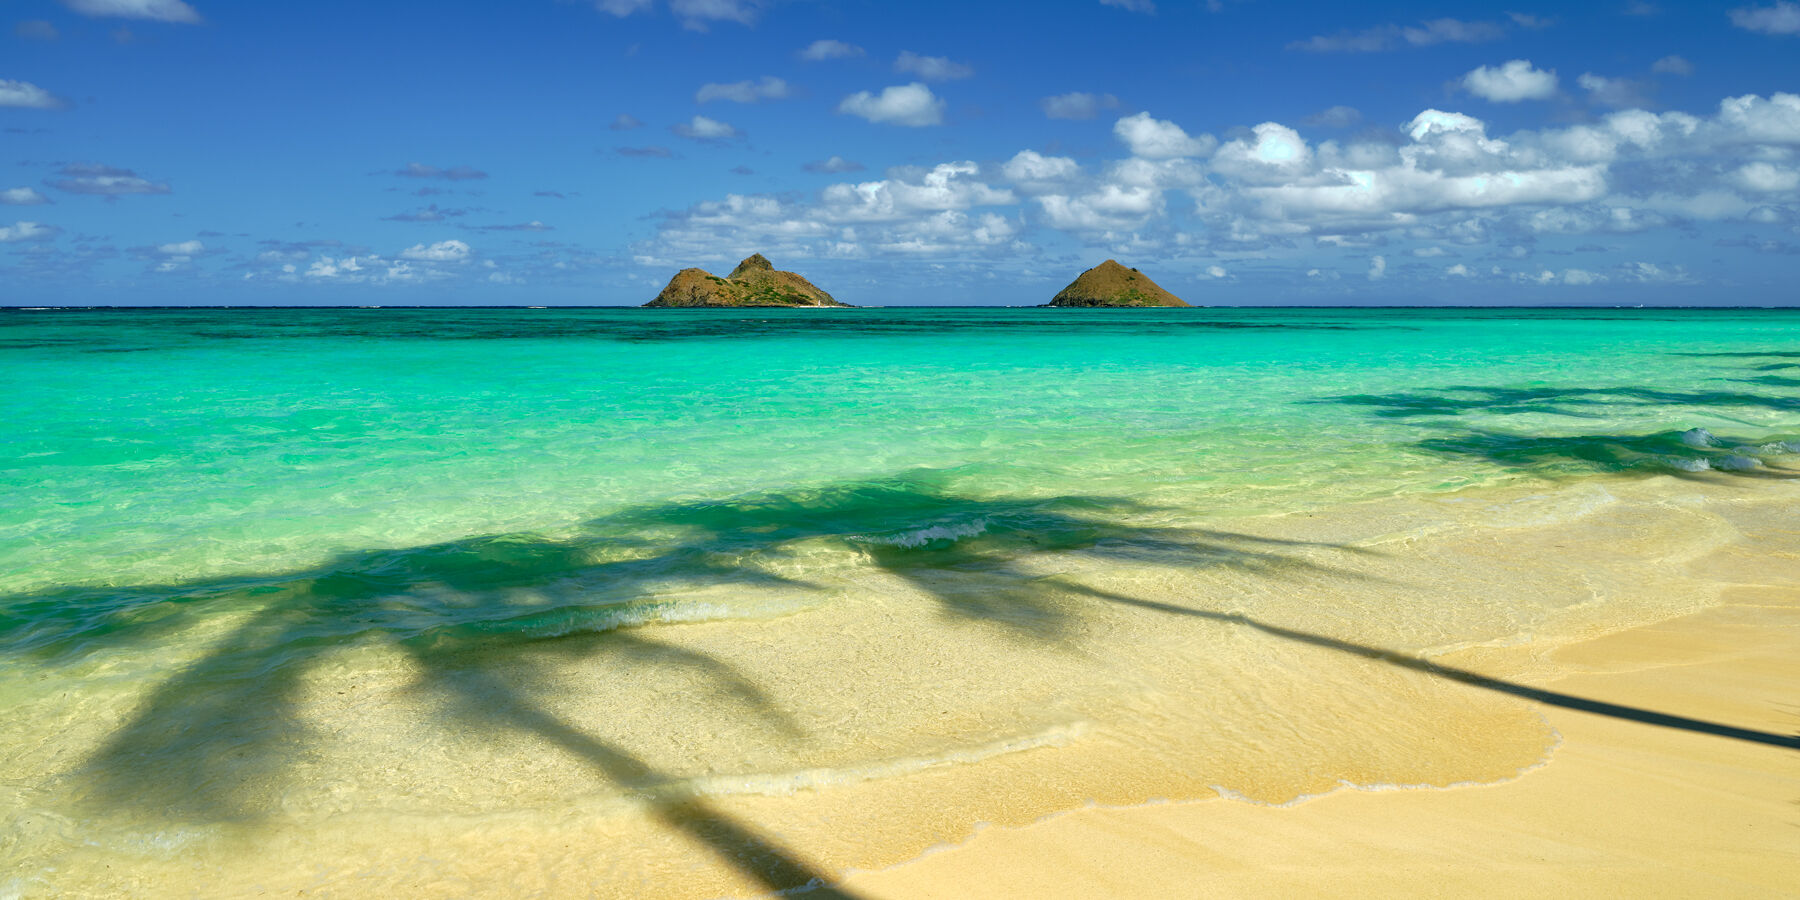 Serendipity is a fine art photograph from Andrew Shoemaker at Lanikai Beach on the Hawaiian island of Oahu featuring azure waters and two islands on the horizon